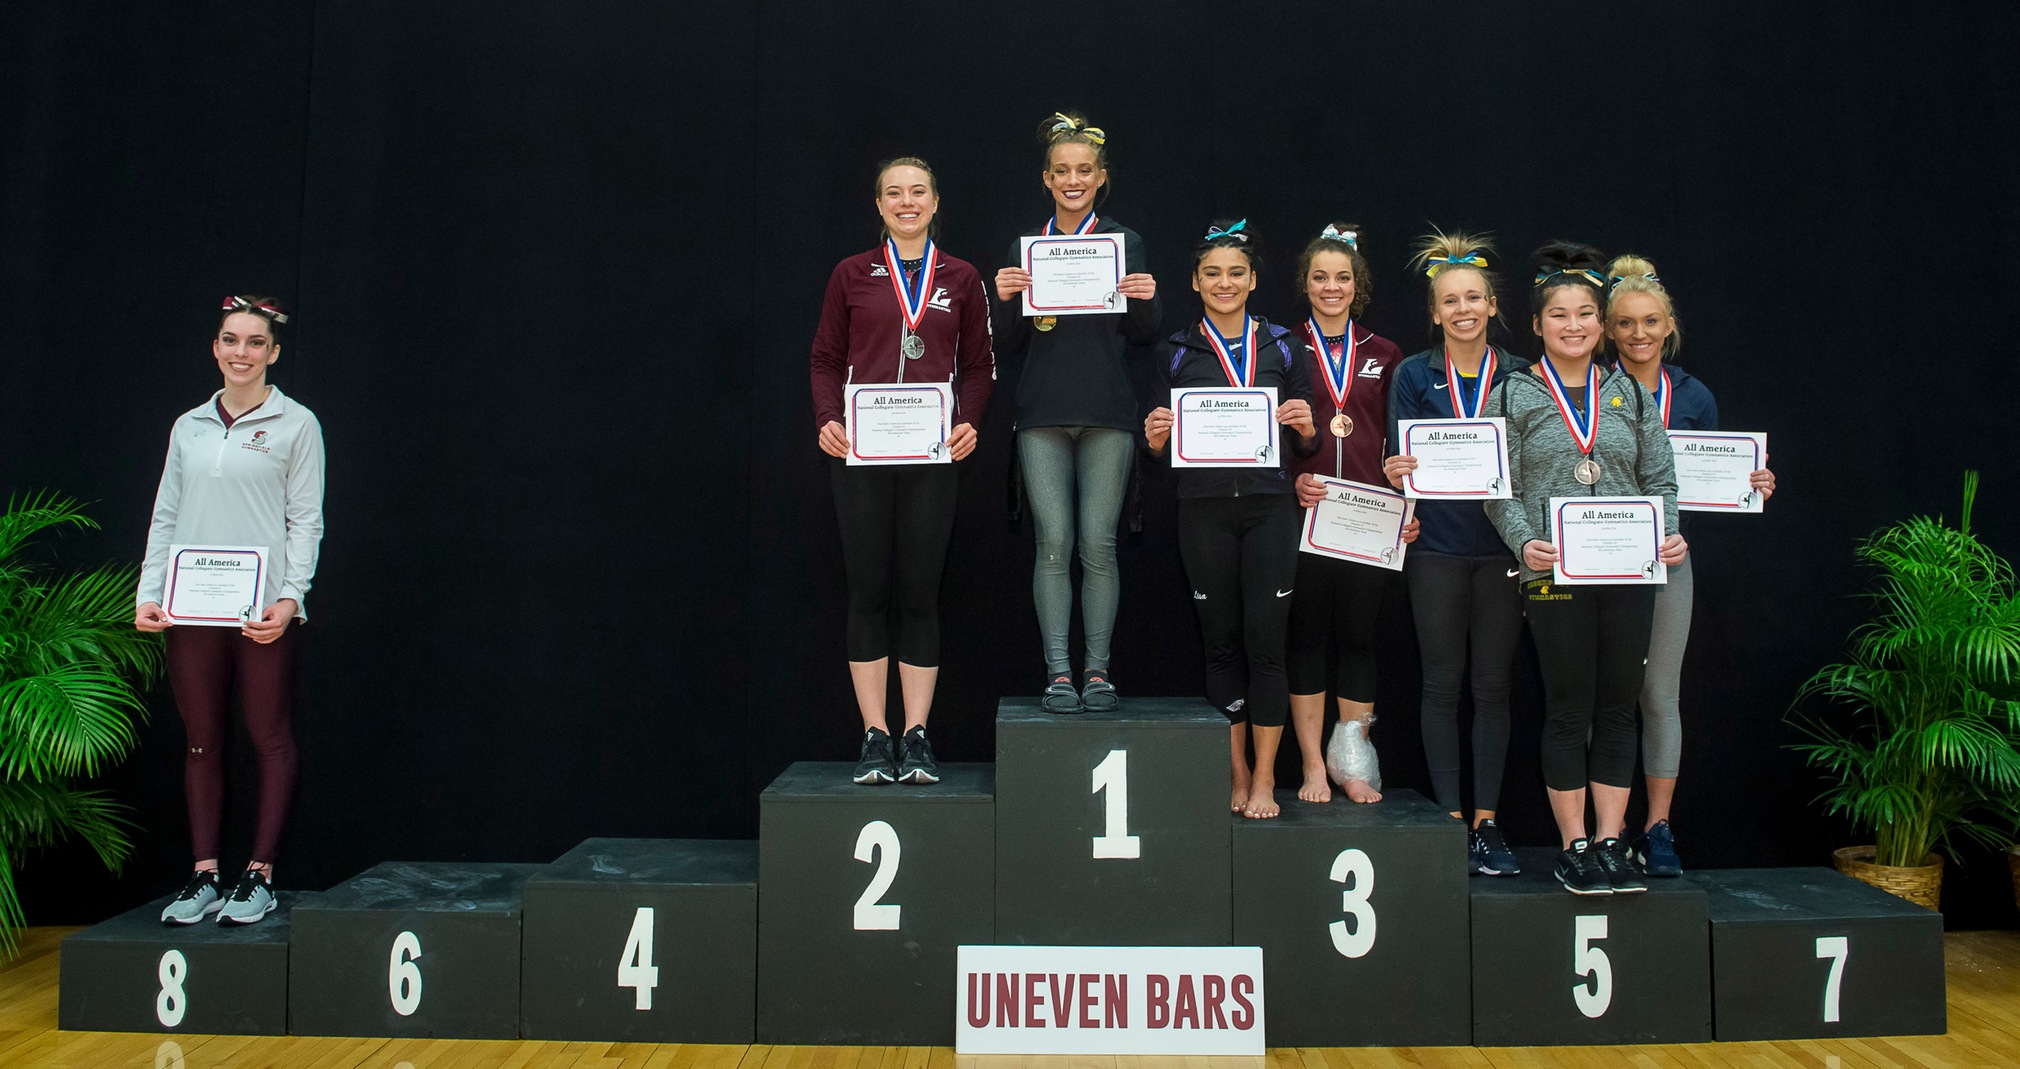 Baylee Tkaczuk had a championship-record score on the way to defending her uneven bars national title.